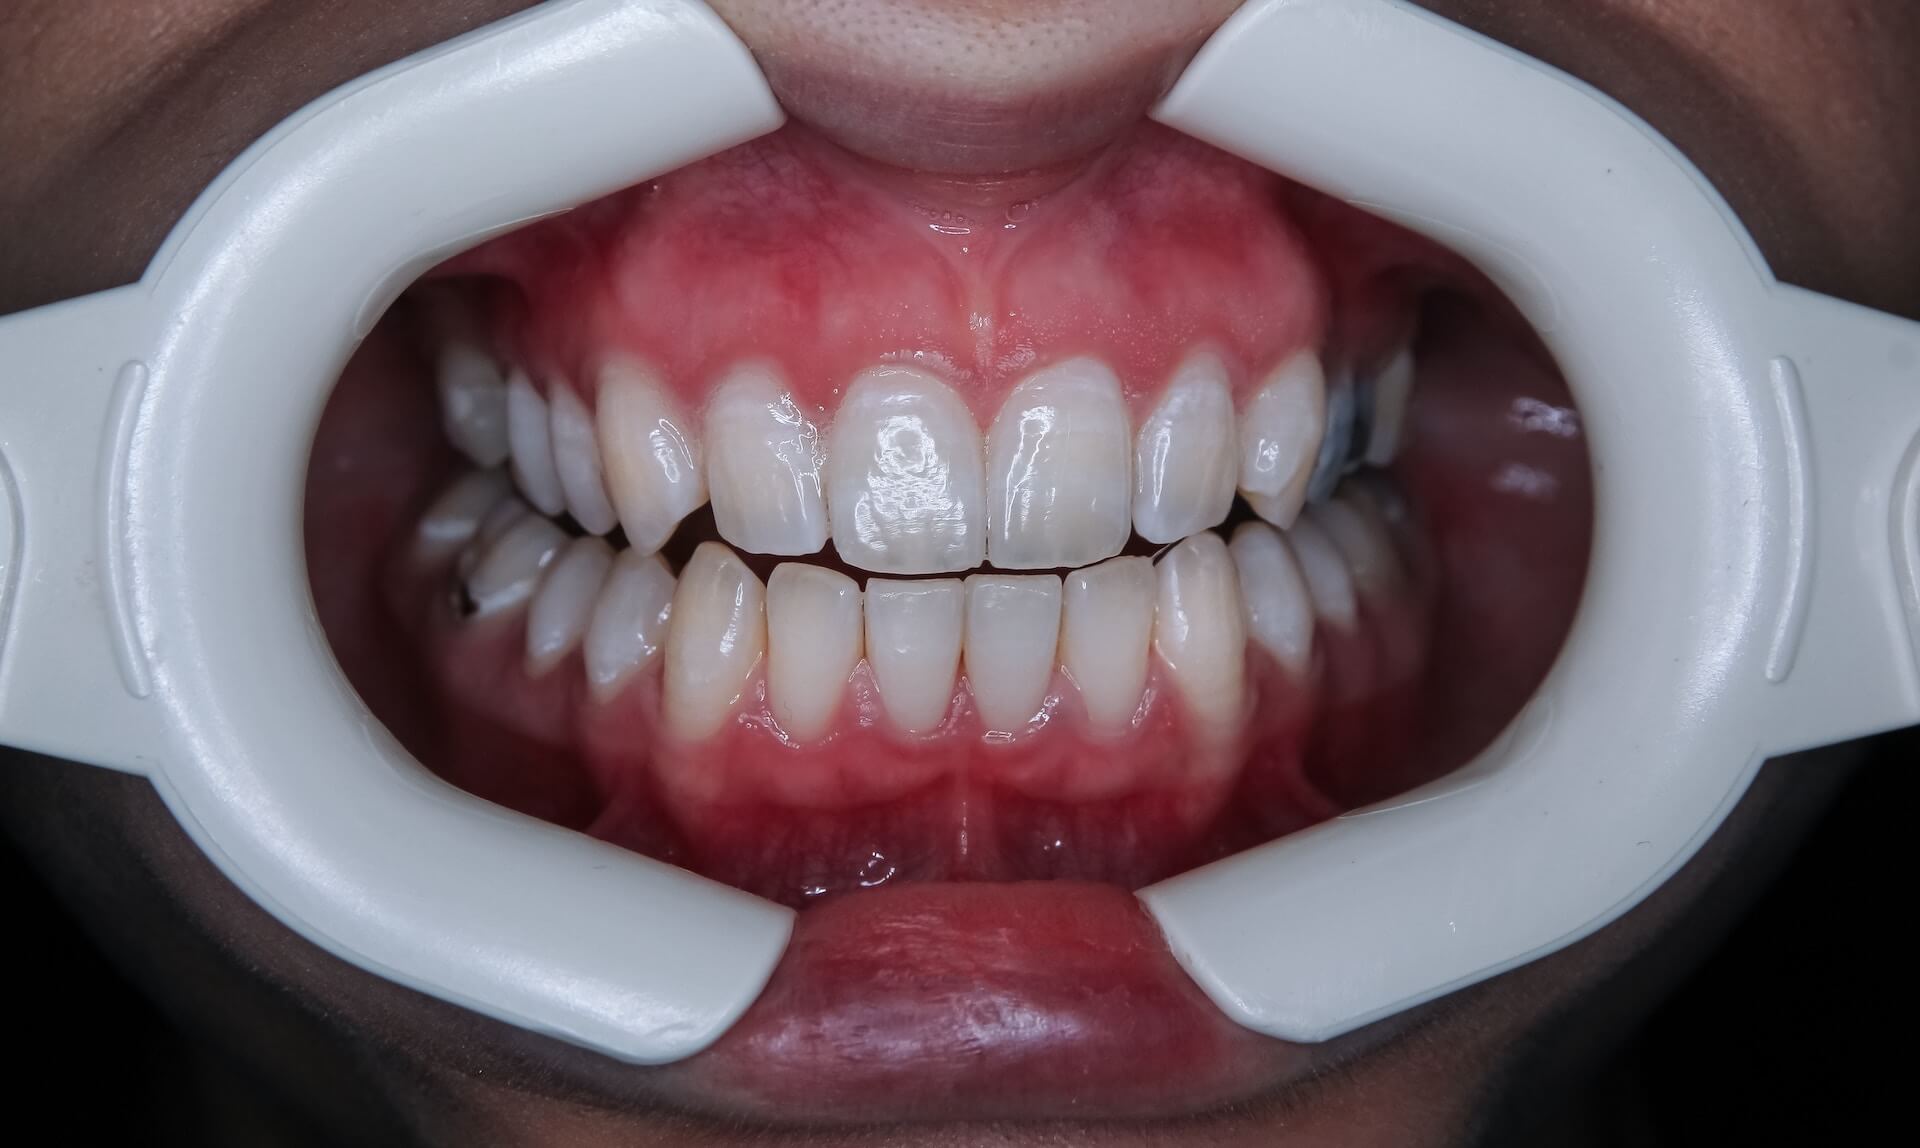 Someones teeth ready to choose either Invisalign or braceschoose either